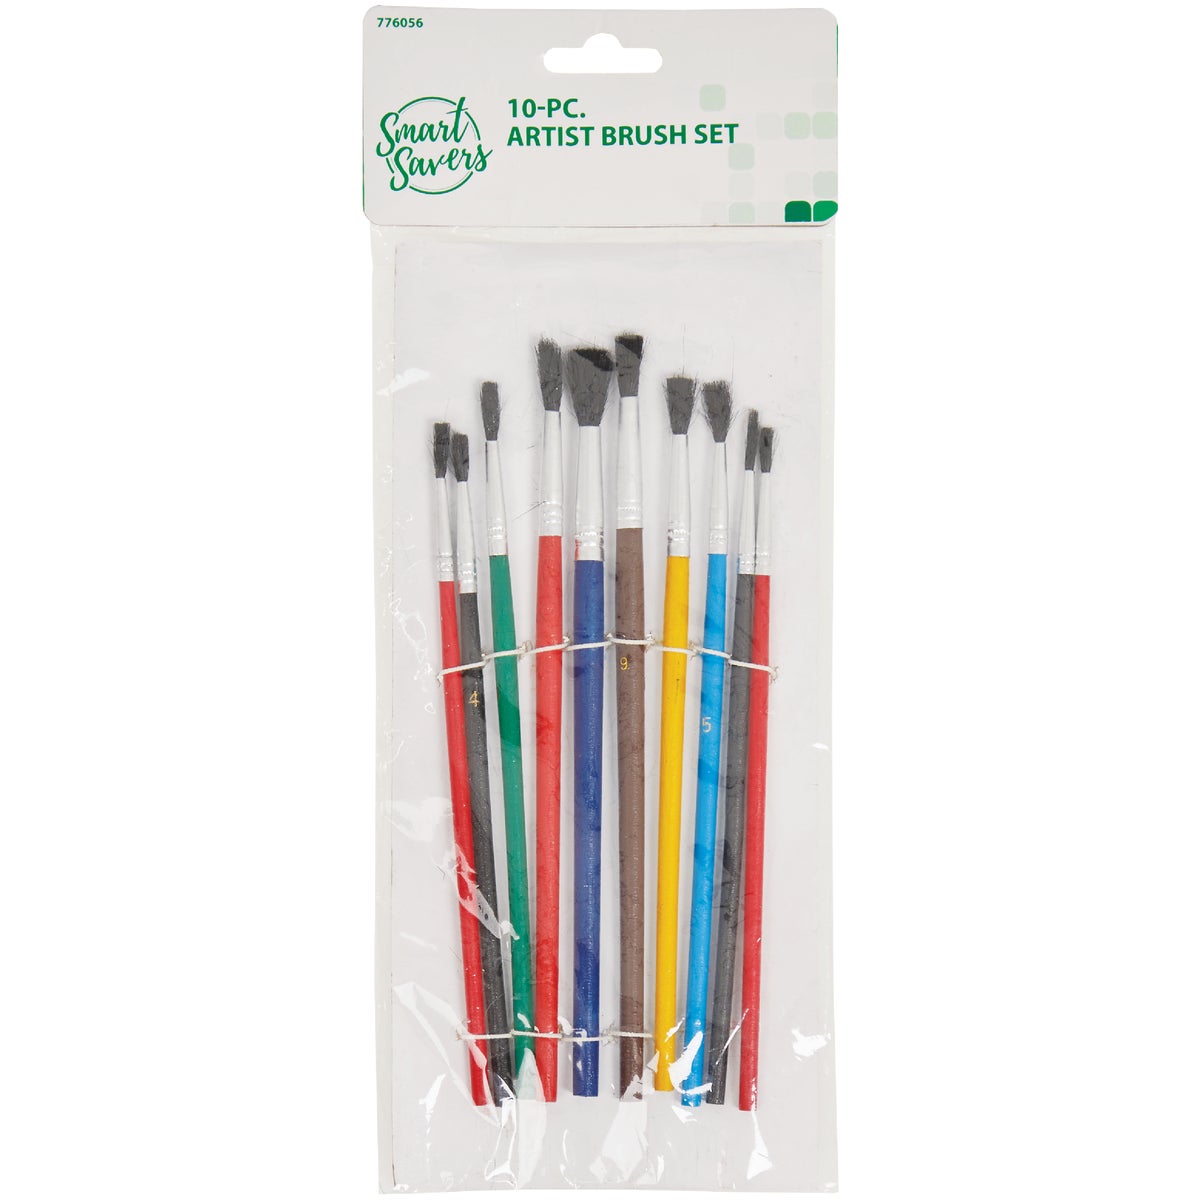 Item 776056, Artist brush. Bristle Material: Polyester. Assorted - 1/8 In. To 1/4 In.